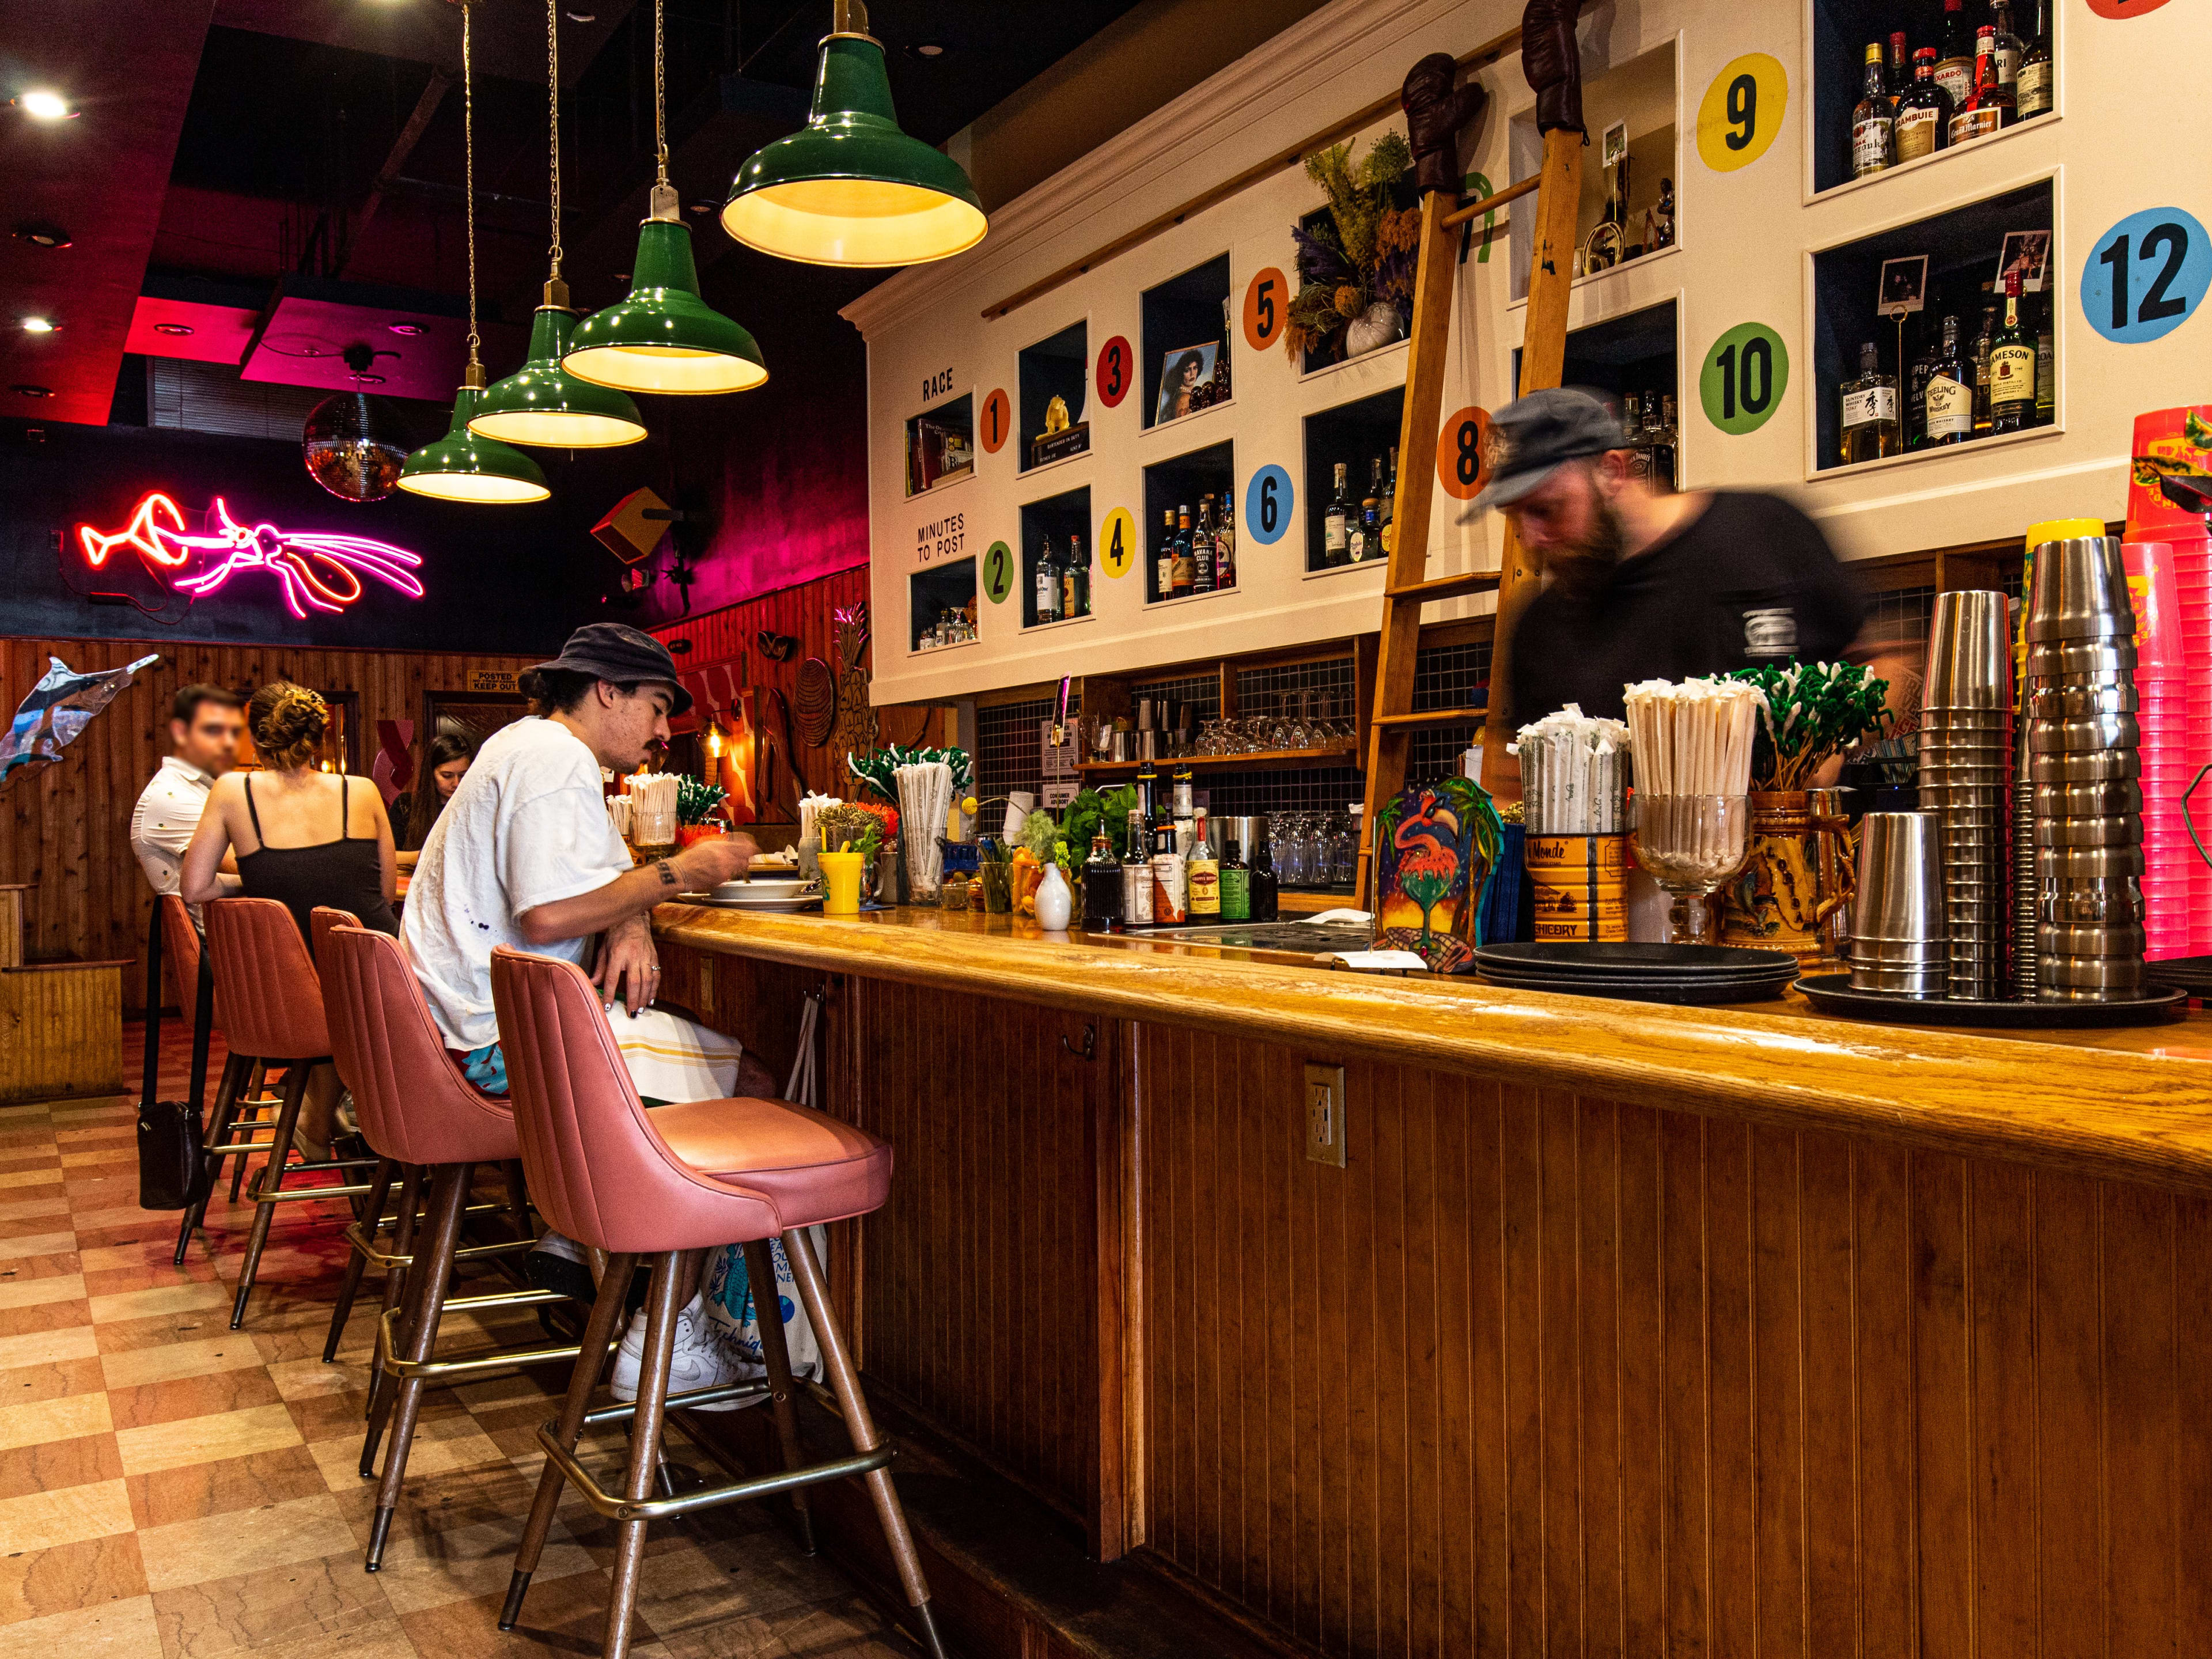 15 of the Best Bars and Clubs in Cleveland, As Determined By You, Cleveland